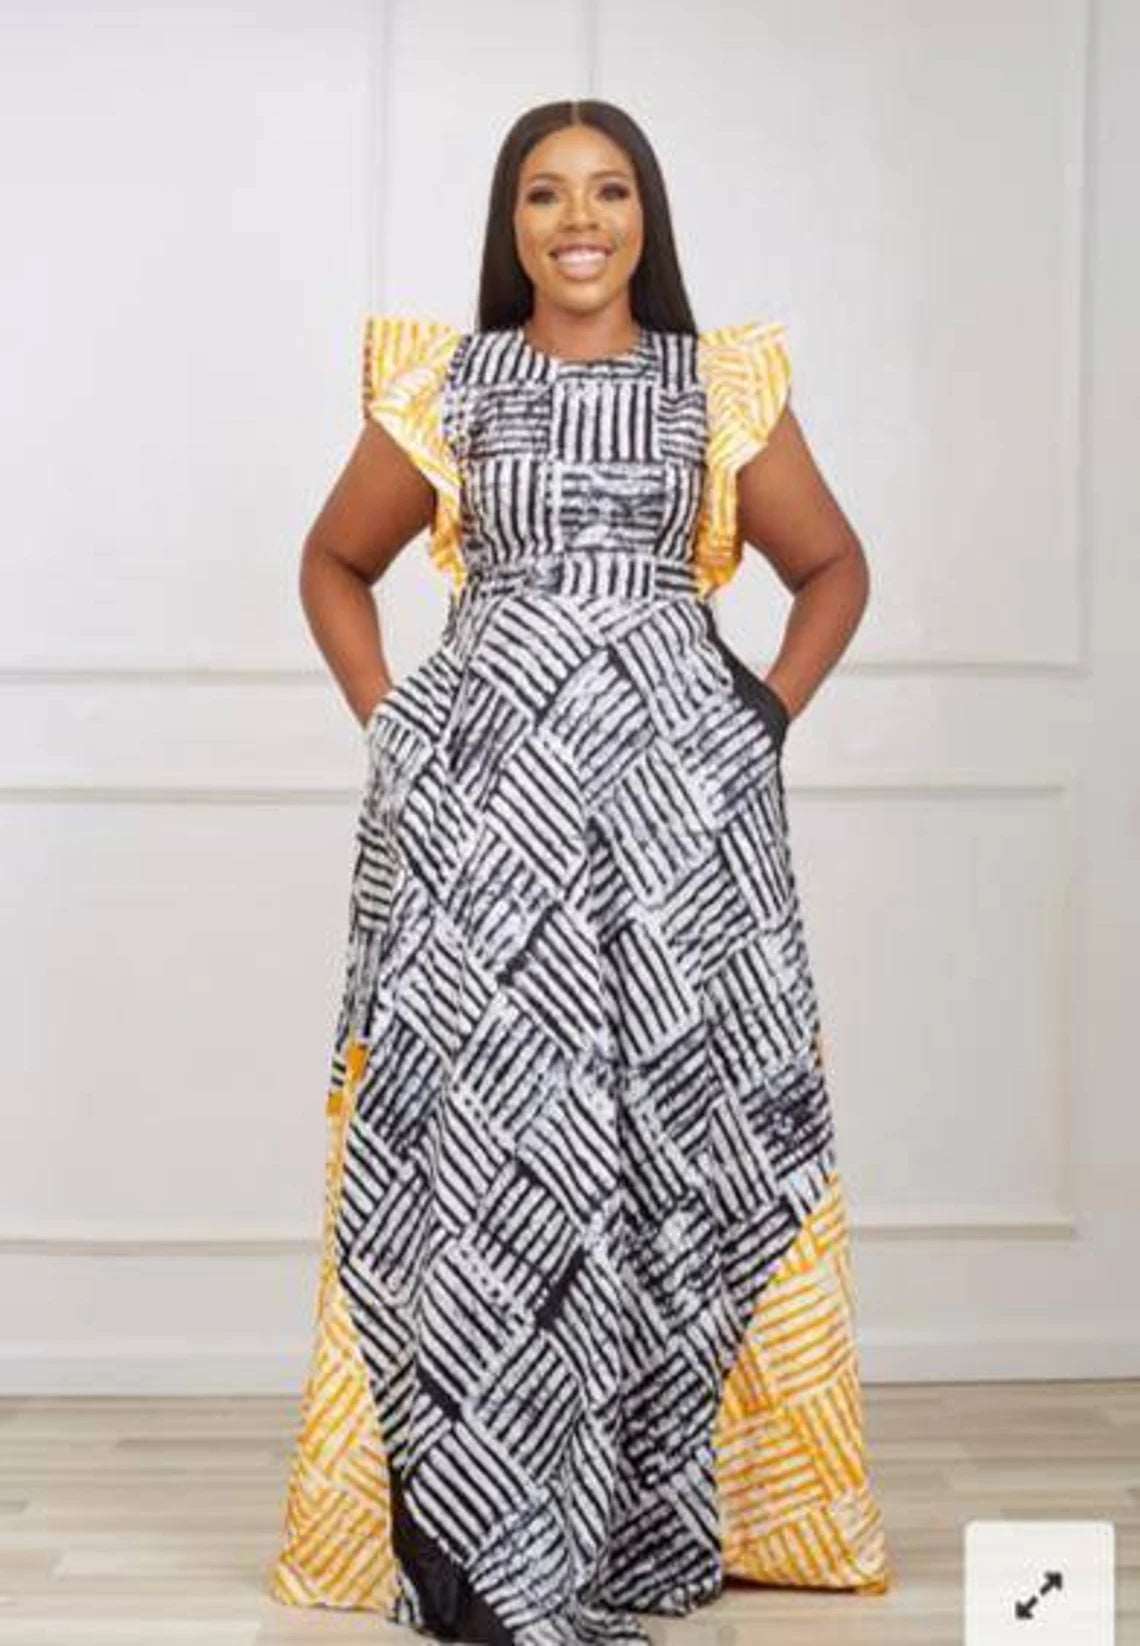 Artisan-Crafted Elegance: African Batik, Tie-Dye from Skilled Hands in Nigeria - Flexi Africa - Flexi Africa offers Free Delivery Worldwide - Vibrant African traditional clothing showcasing bold prints and intricate designs